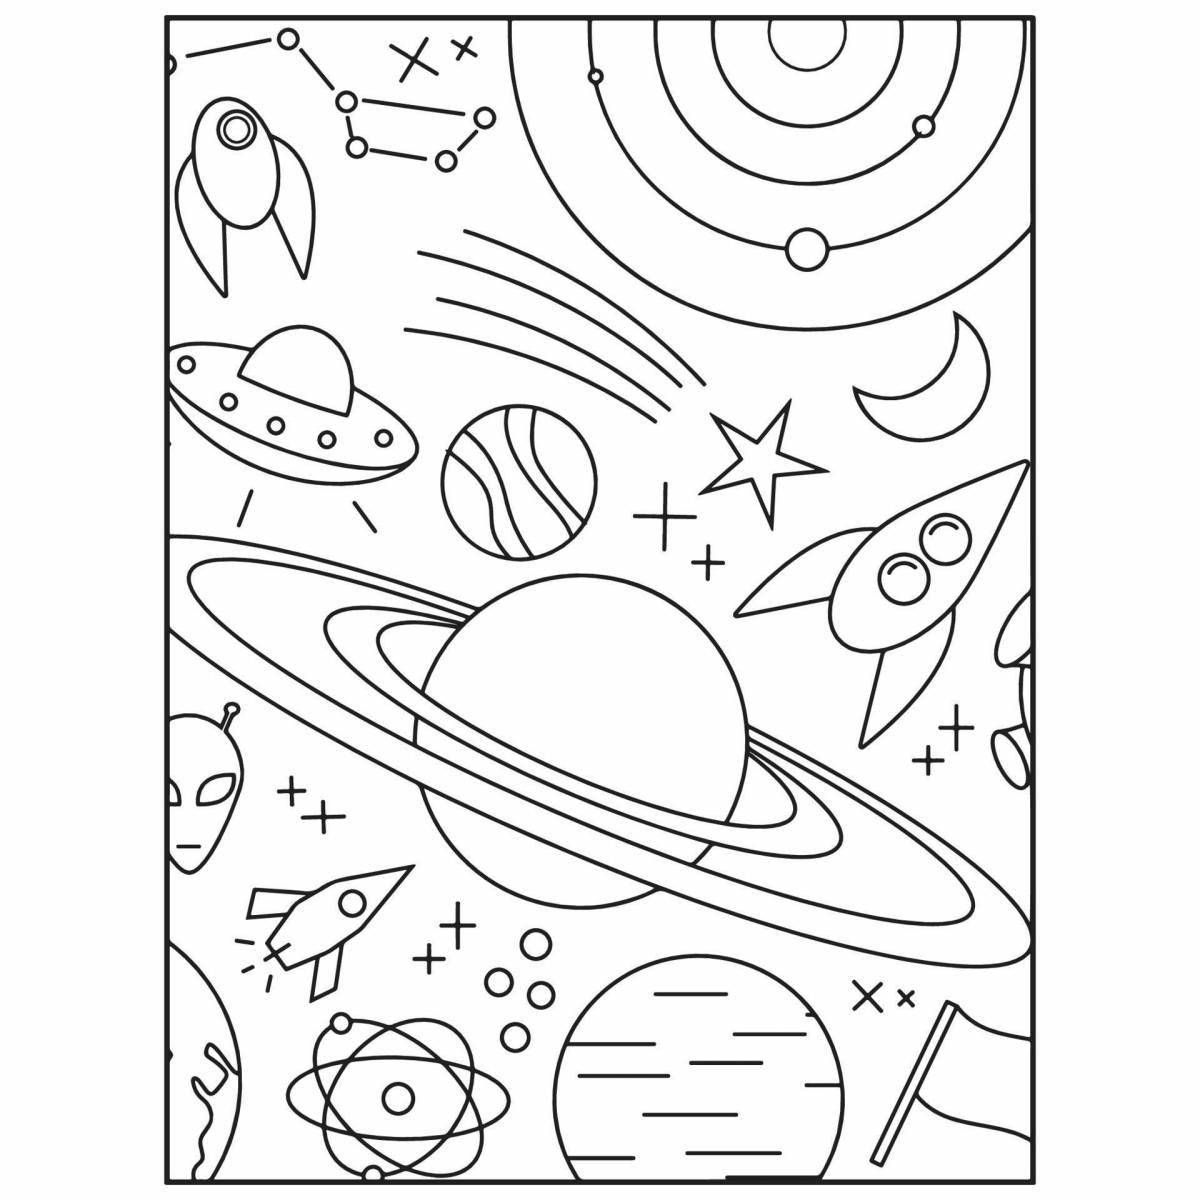 Fancy space coloring by numbers